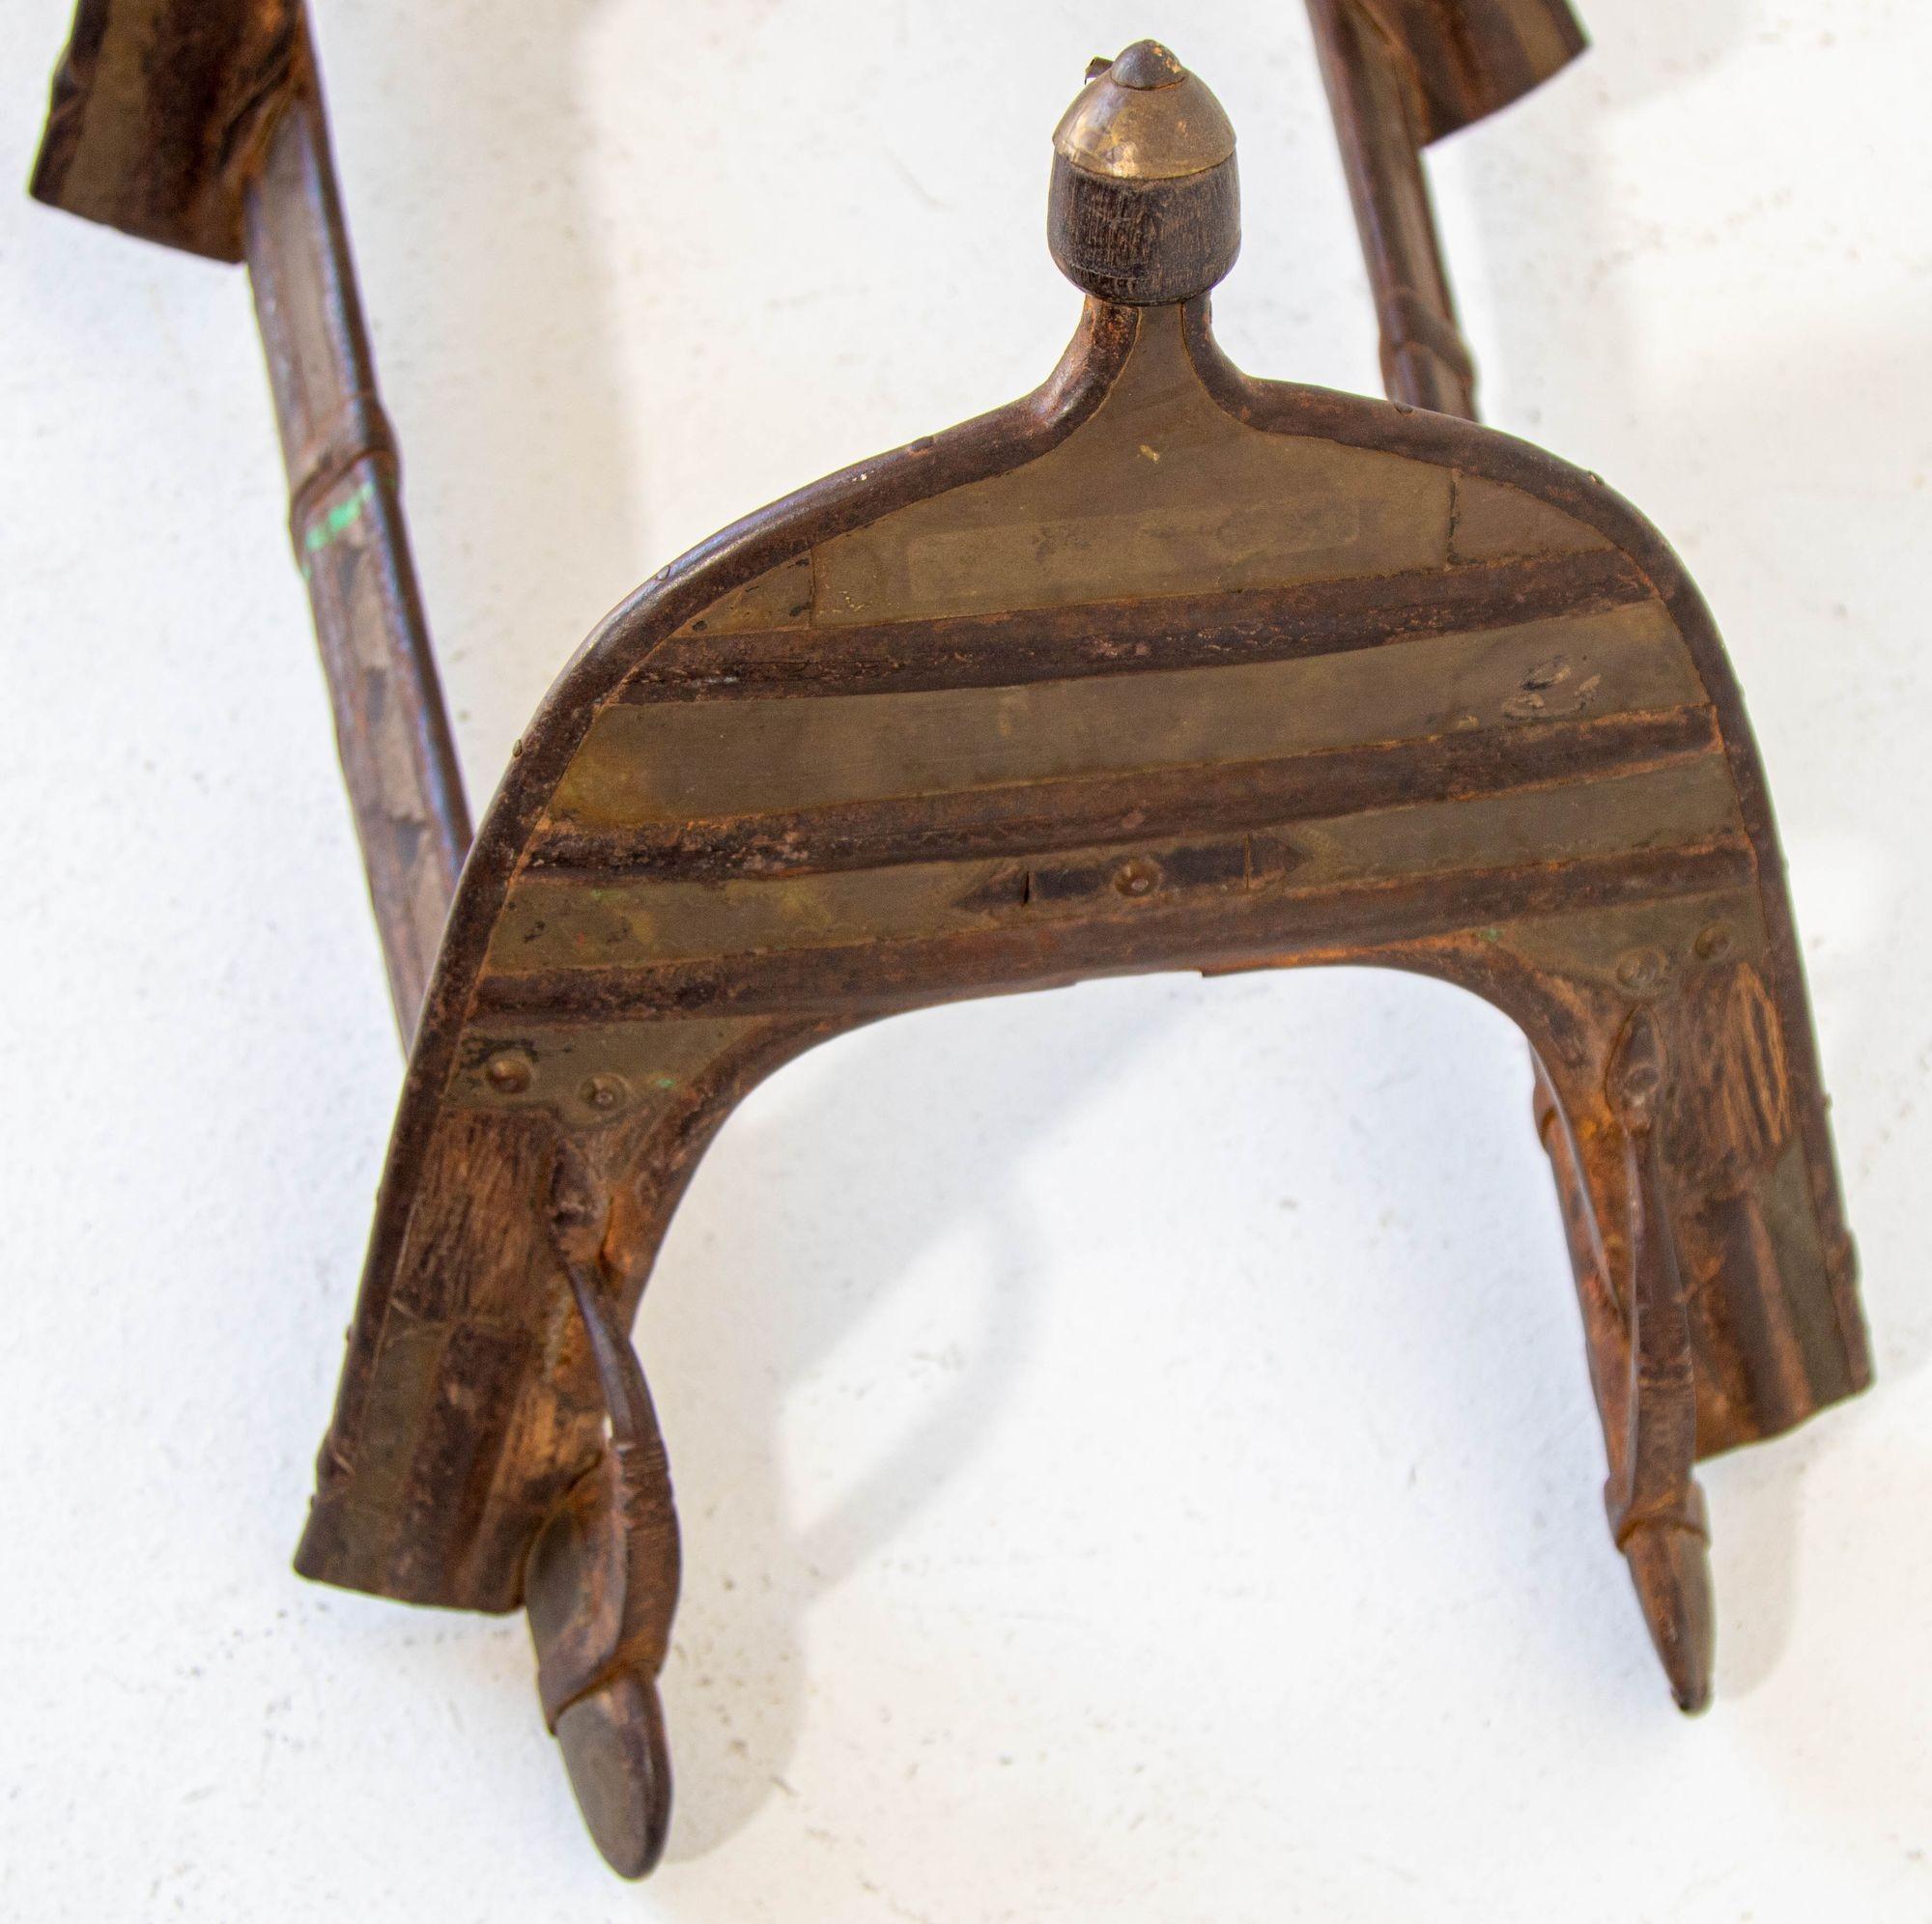 Wood and Brass Antique 19th Century Middle Eastern Camel Seat Saddle For Sale 8